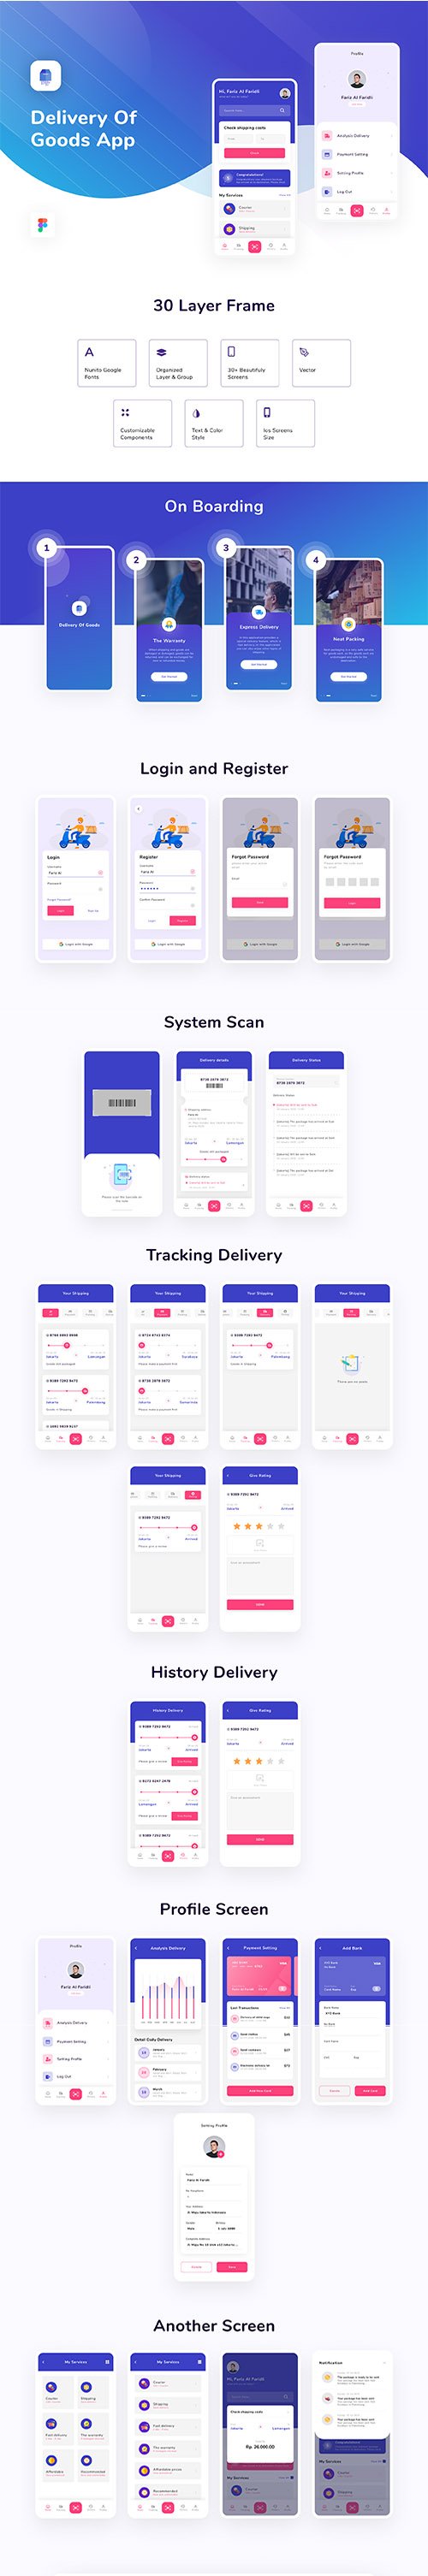 Delivery Of Goods App